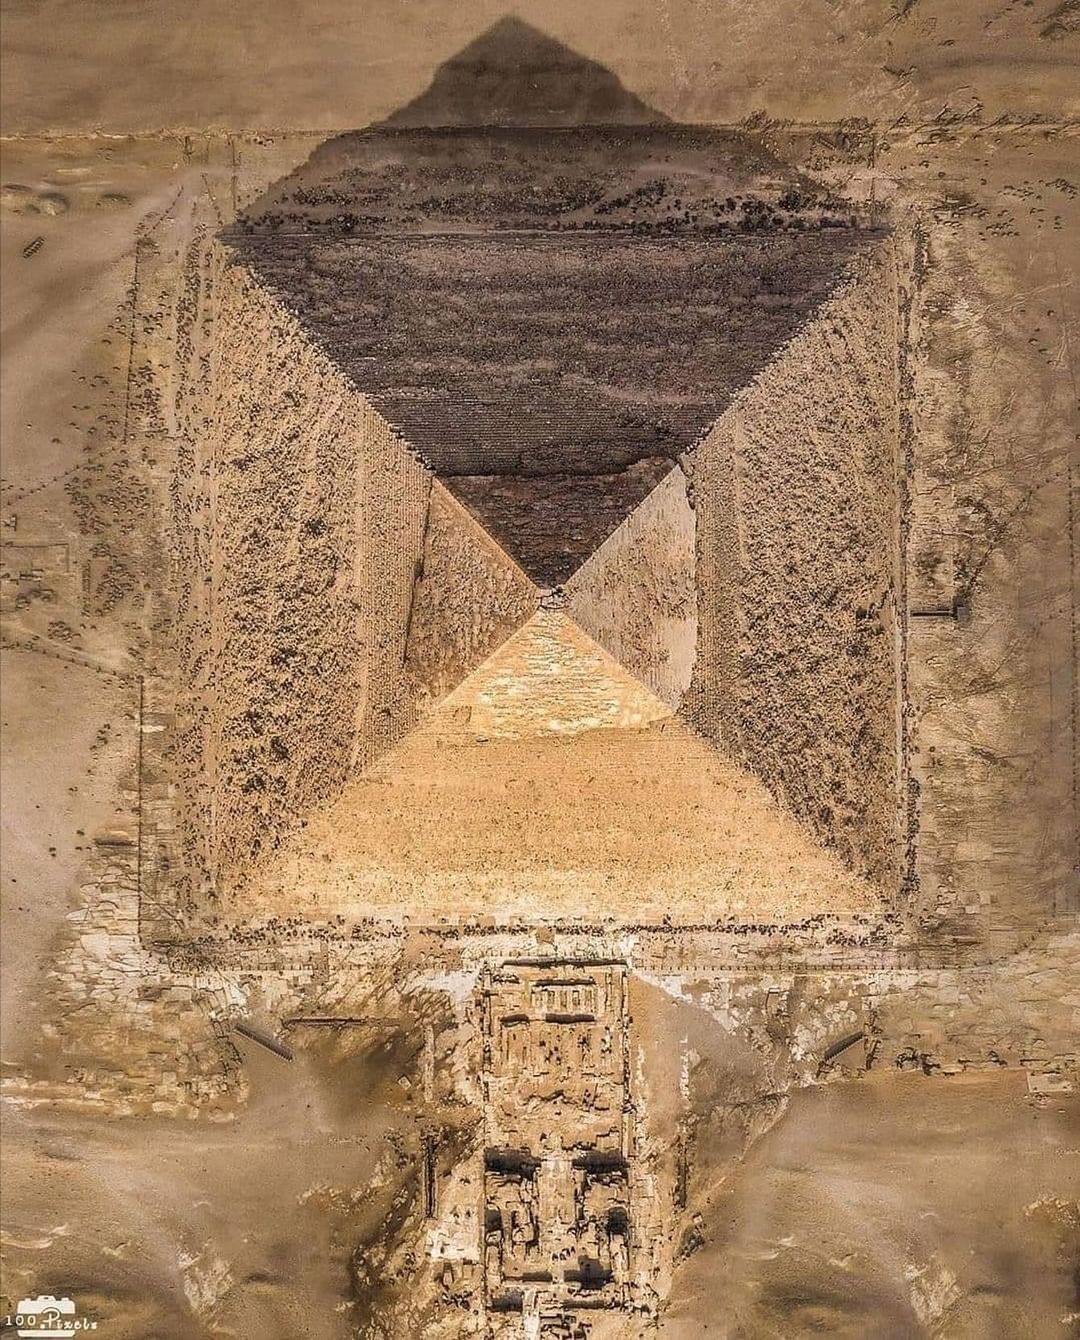 How the Pyramids of Egypt were Built - Africa Facts Zone